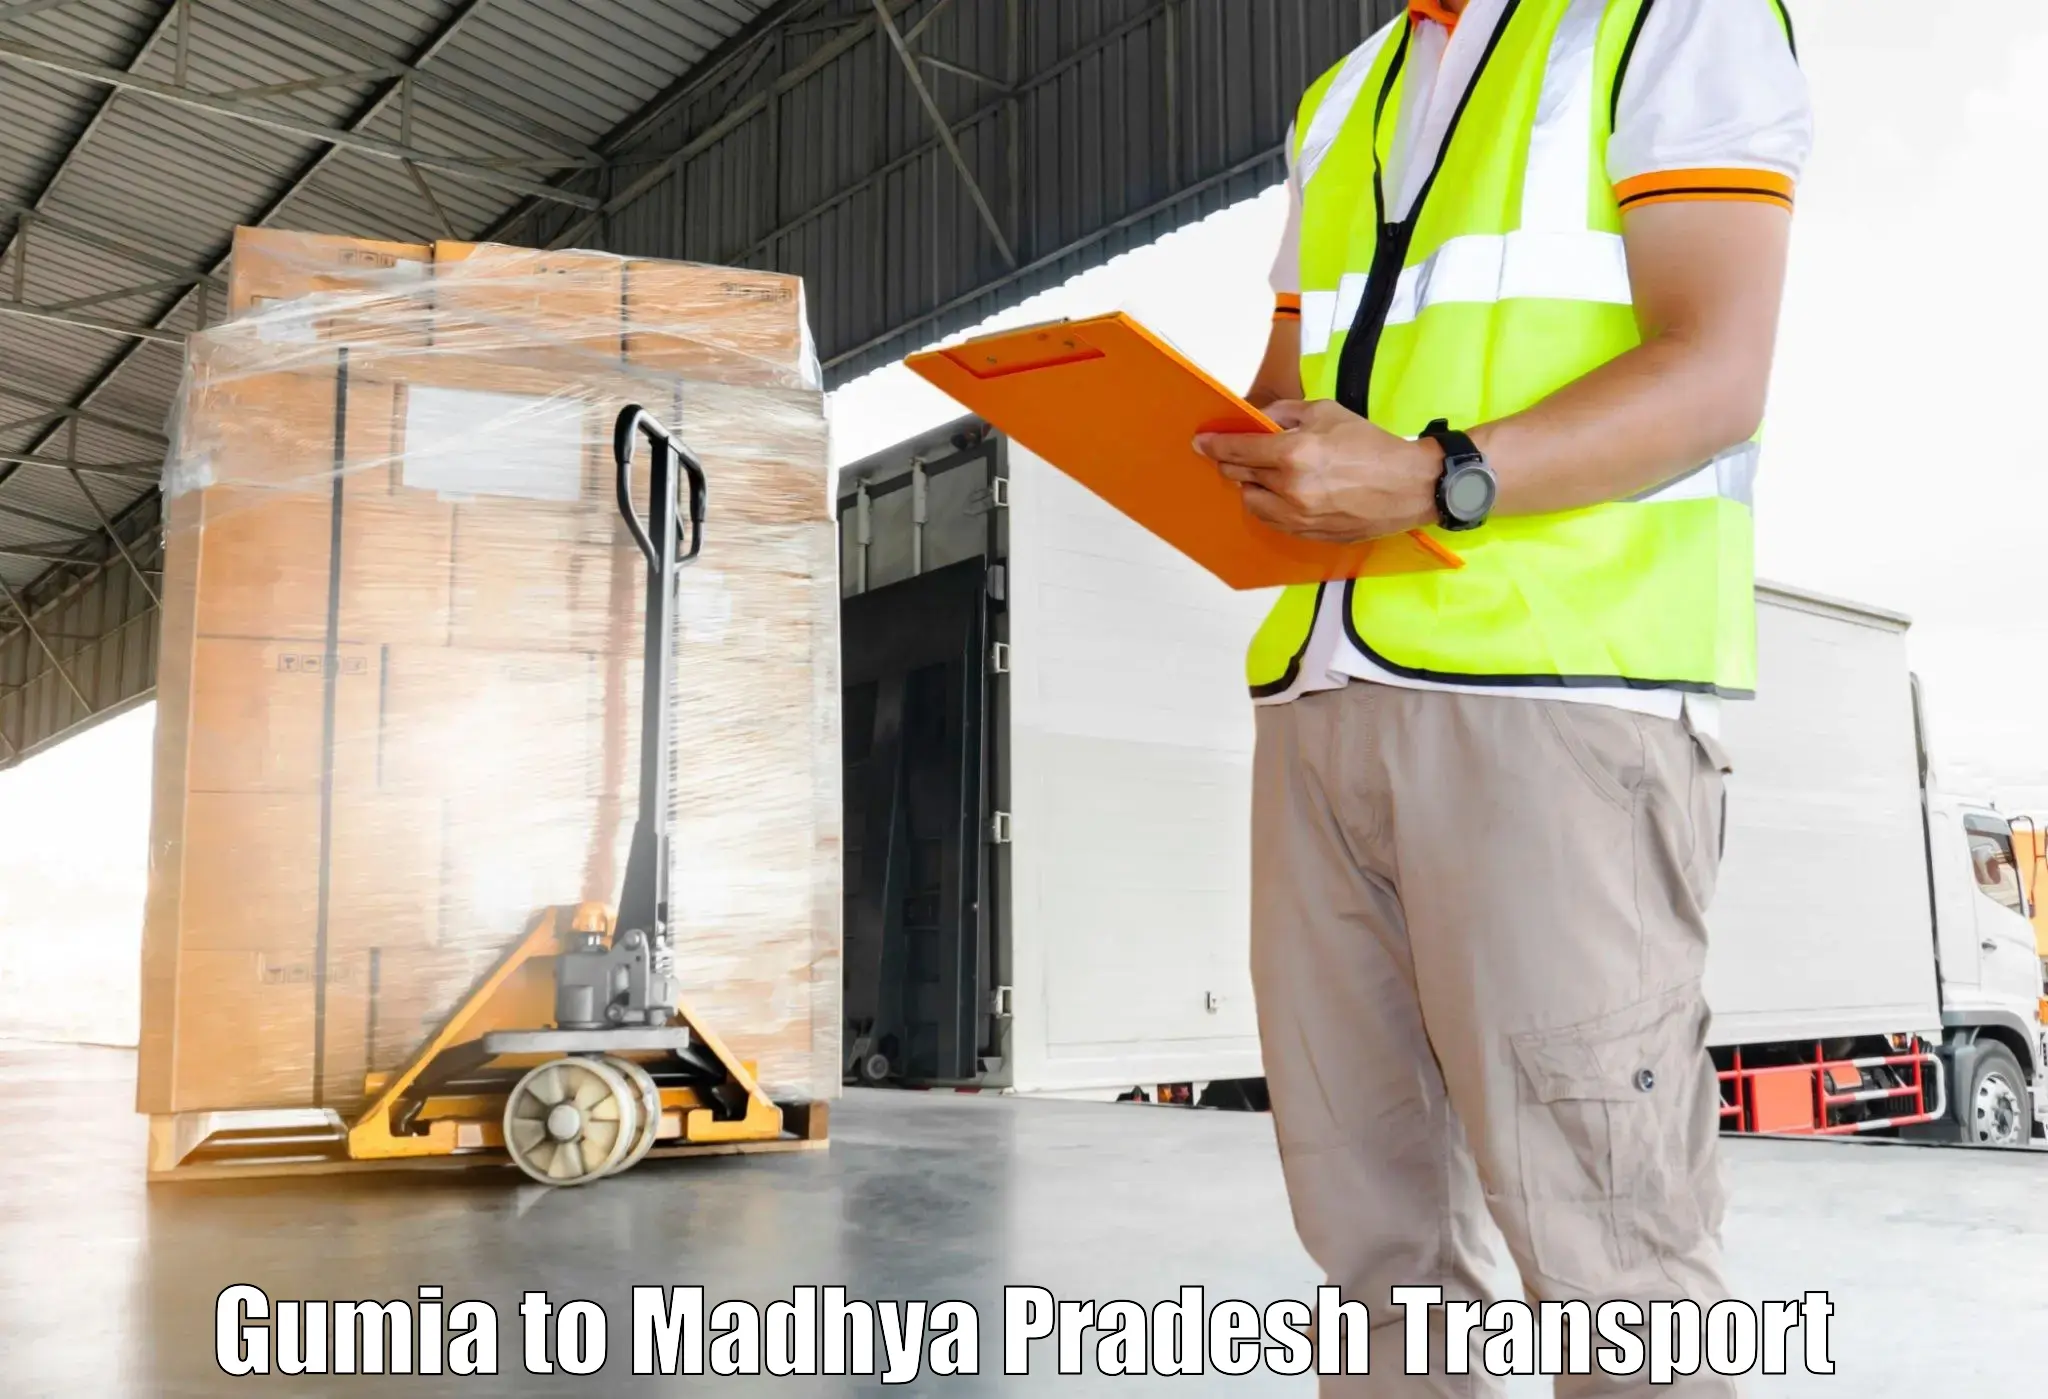 Truck transport companies in India Gumia to Begumganj